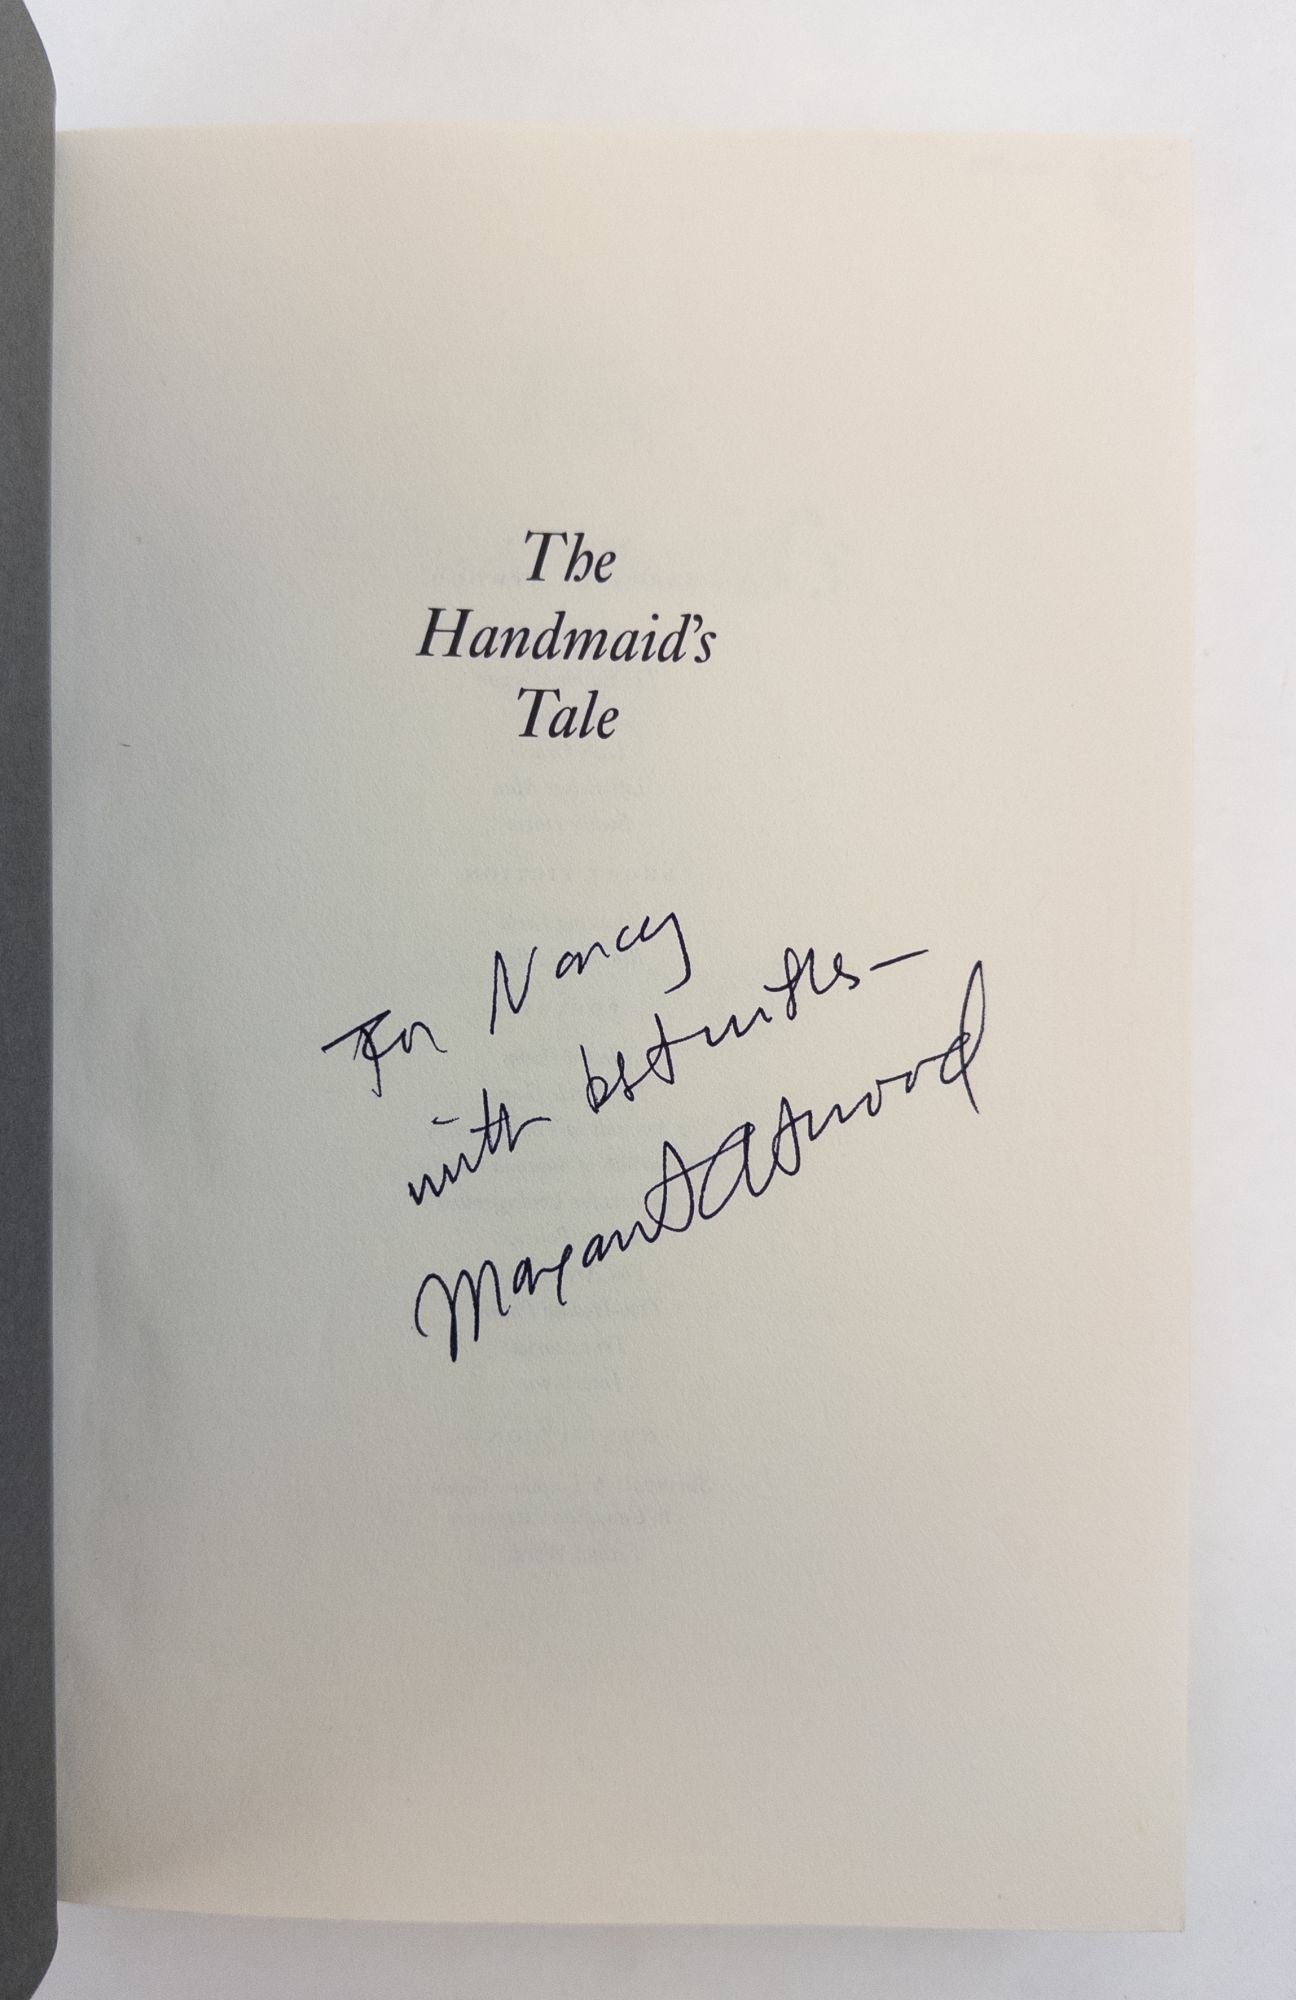 Product Image for THE HANDMAID'S TALE [Inscribed]